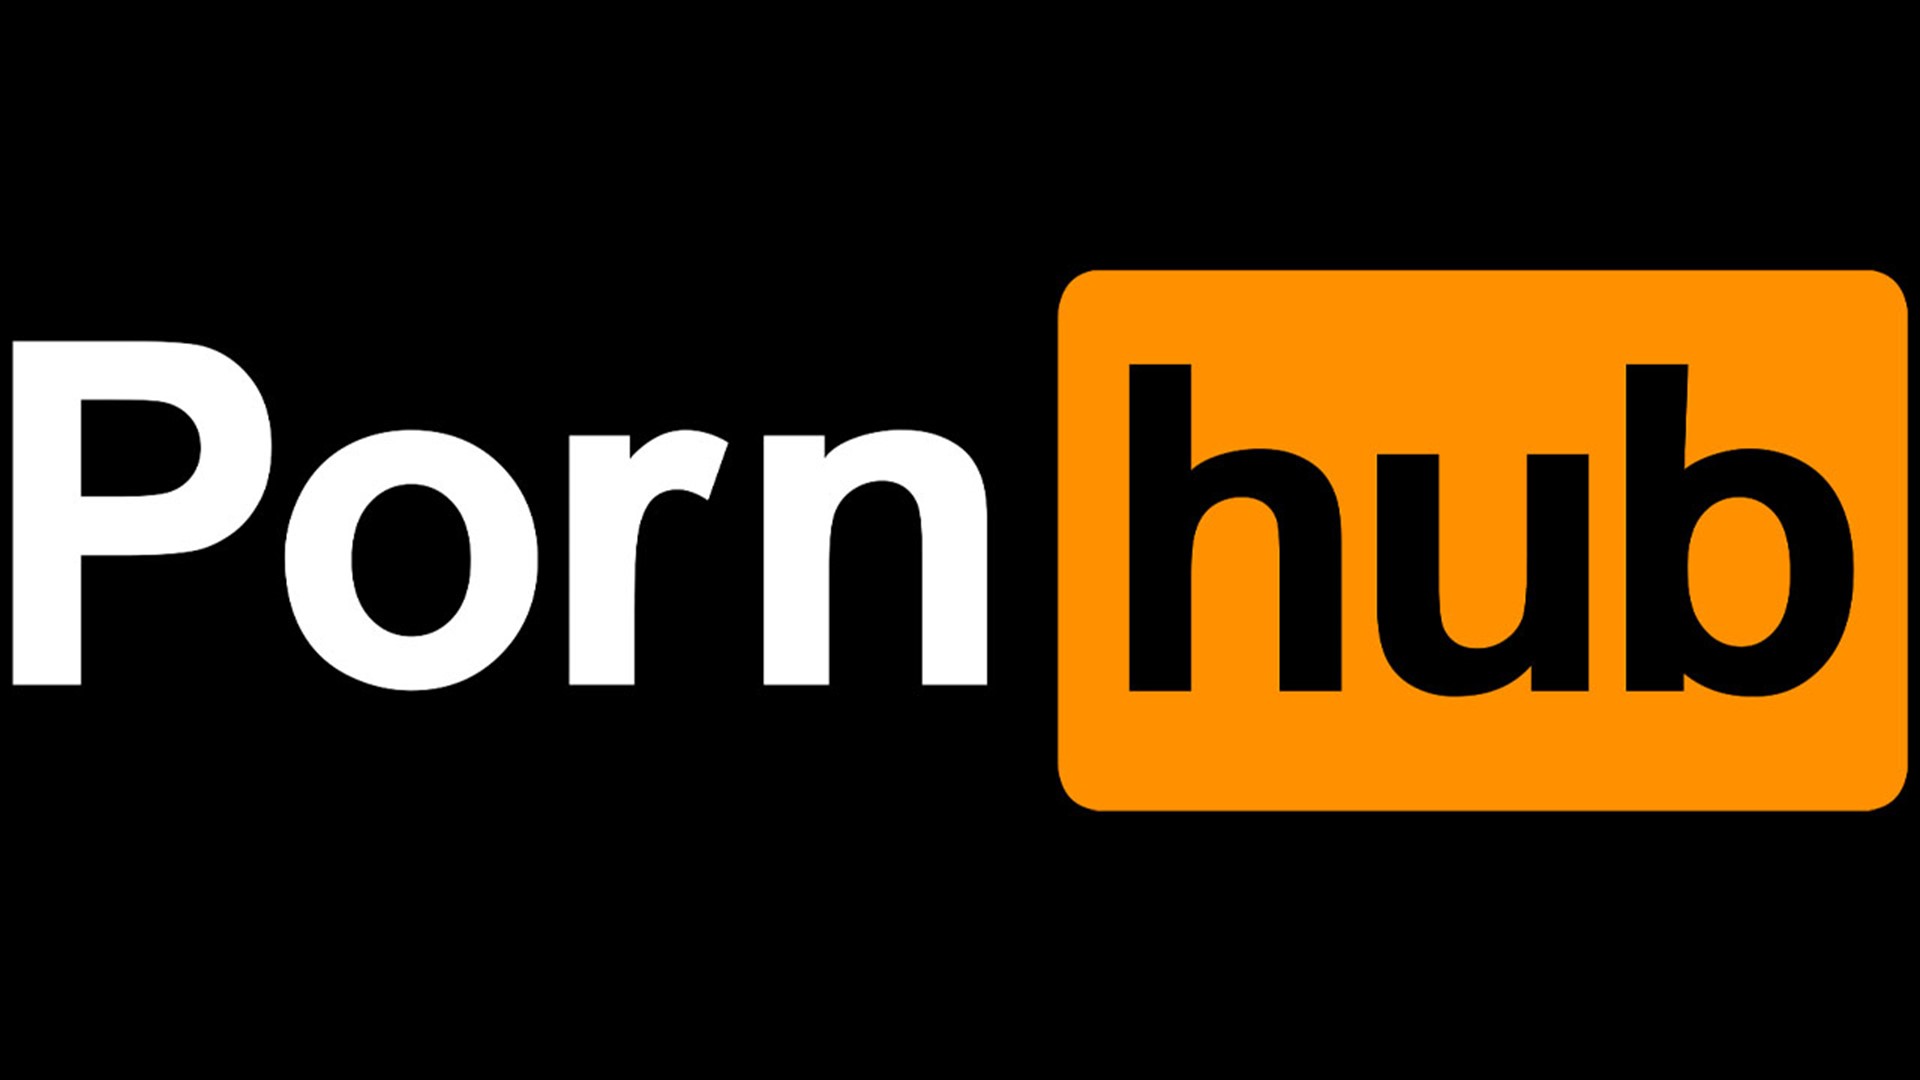 Pornhub.com completely disabled access to their website in Texas in order to comply with HB 1181.